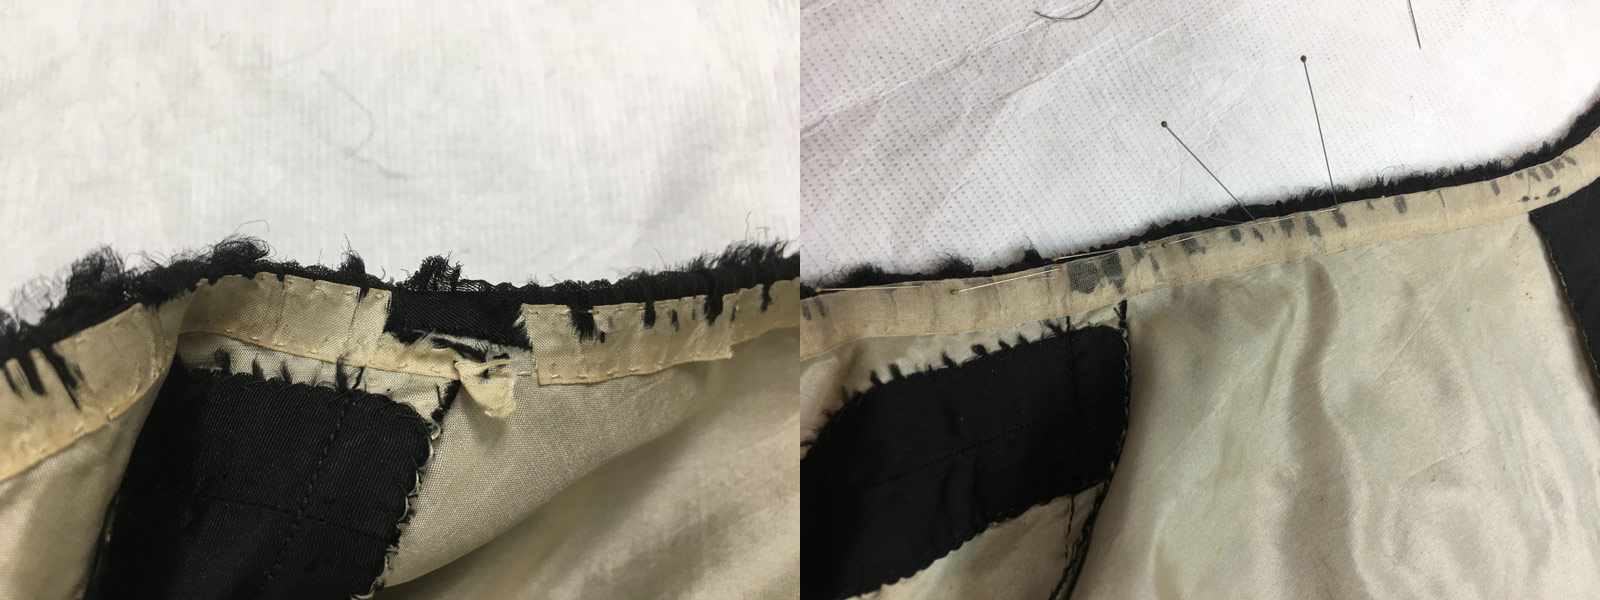 The hem of Queen Victoria's mourning dress before and after restoration.